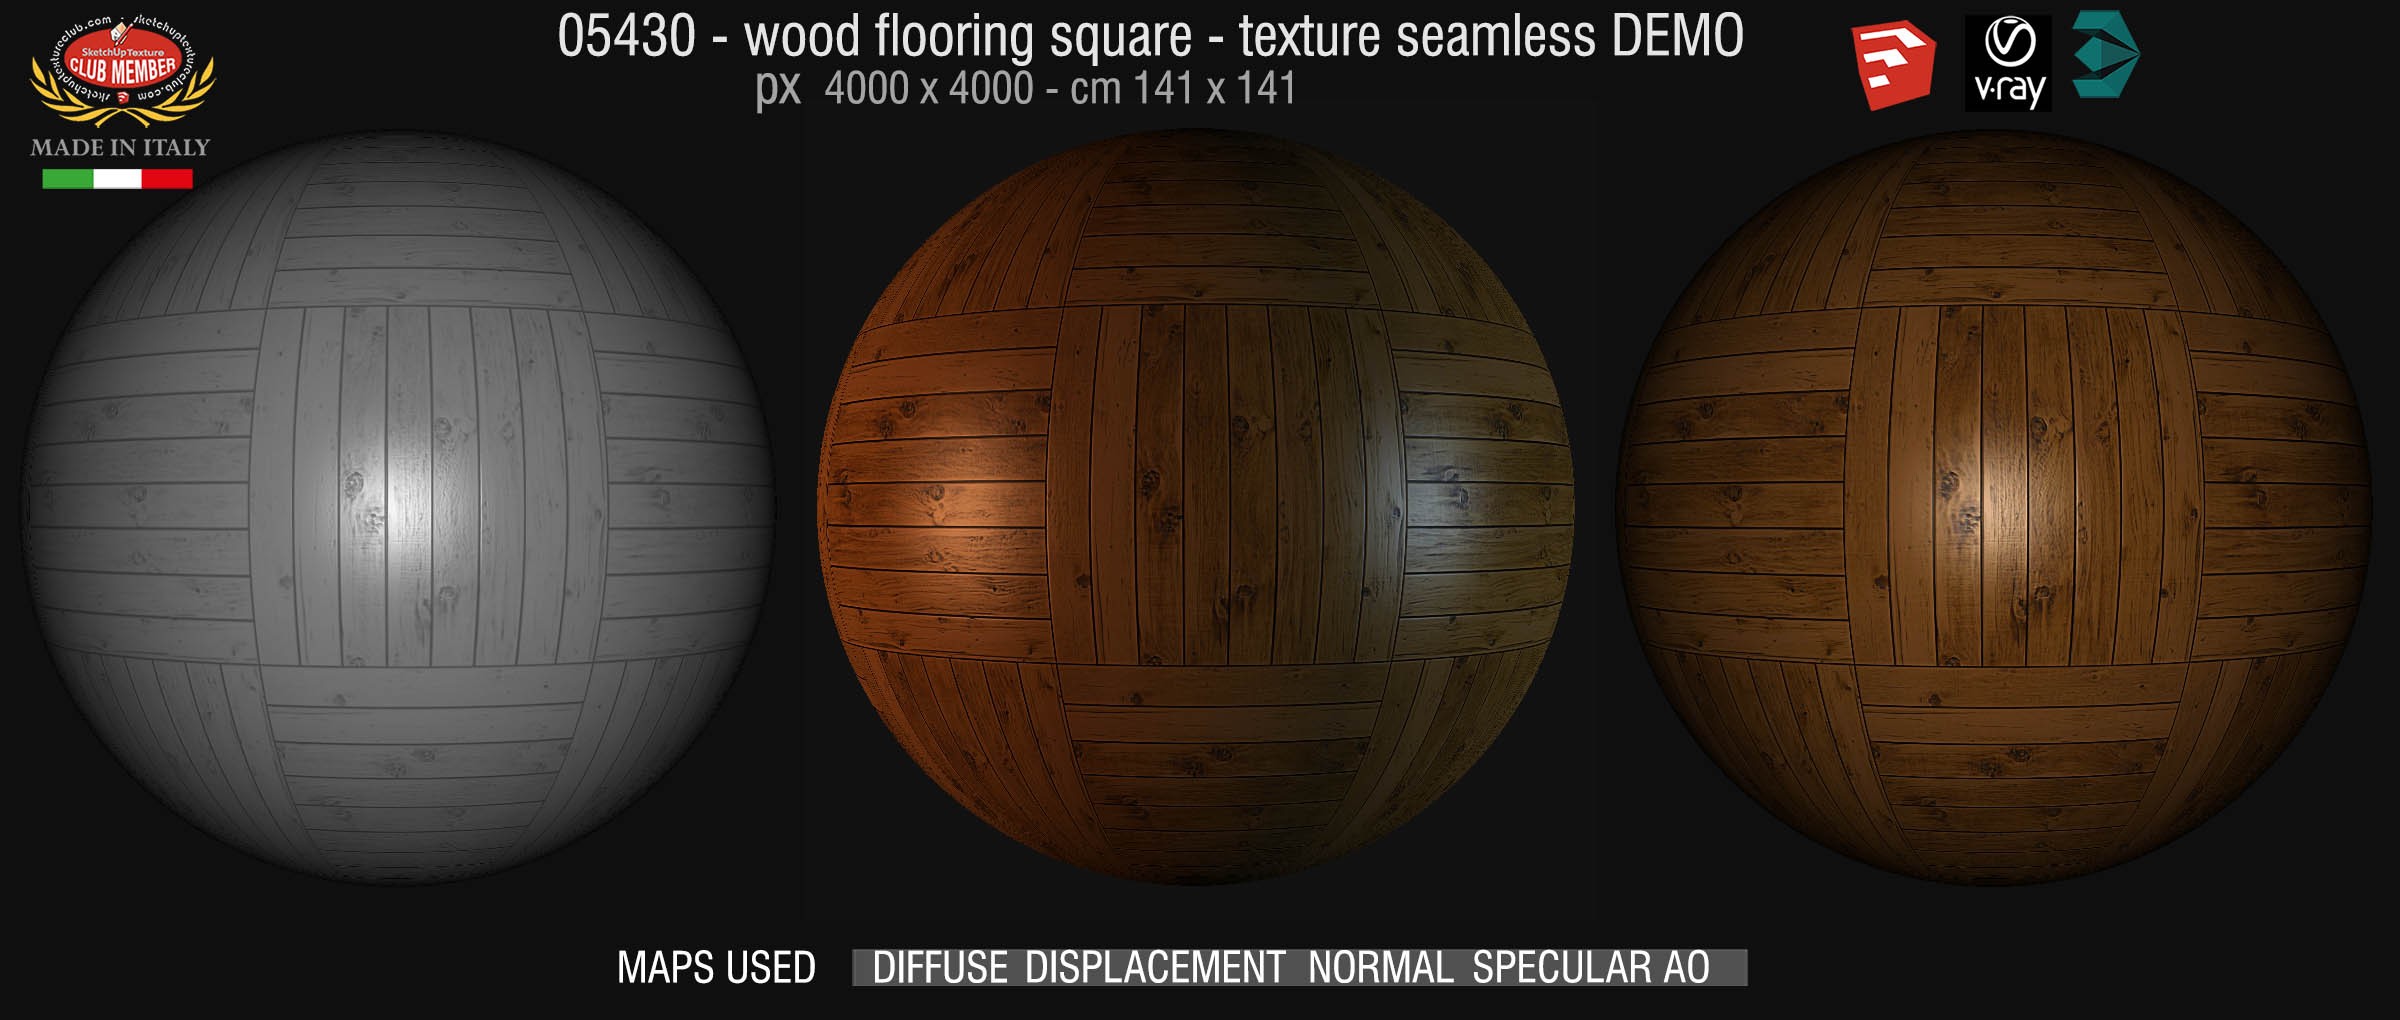 05430 Wood flooring square texture seamless + maps DEMO